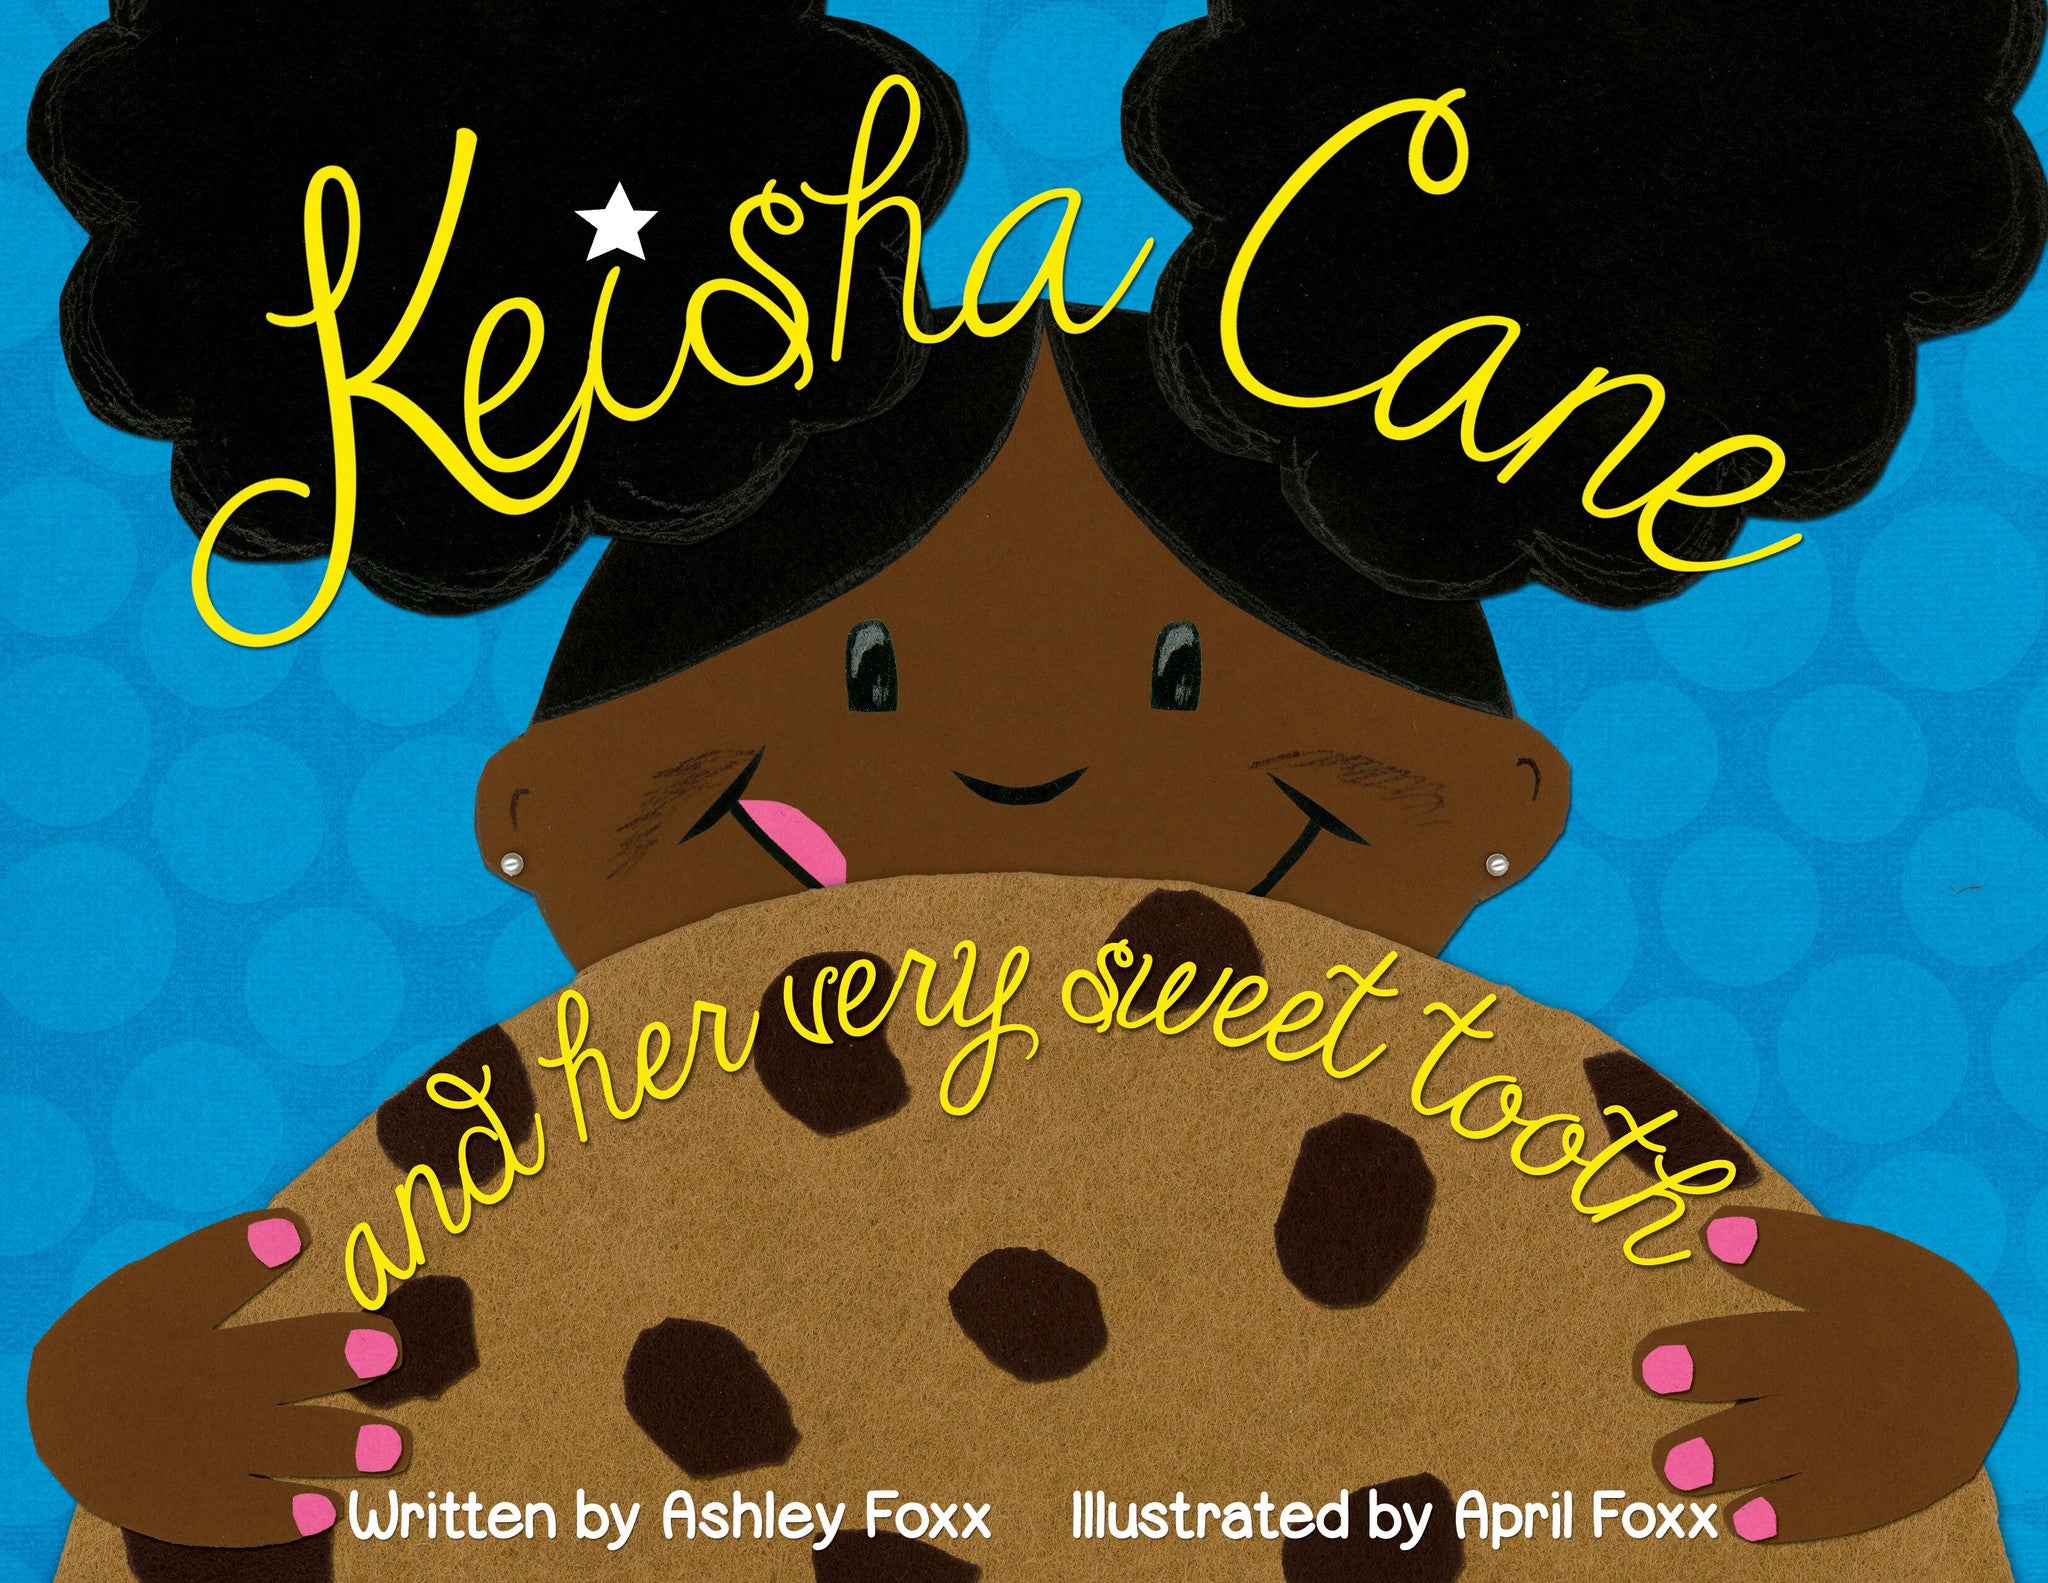 Keisha Cane and Her Very Sweet Tooth - Hardback (Book only)